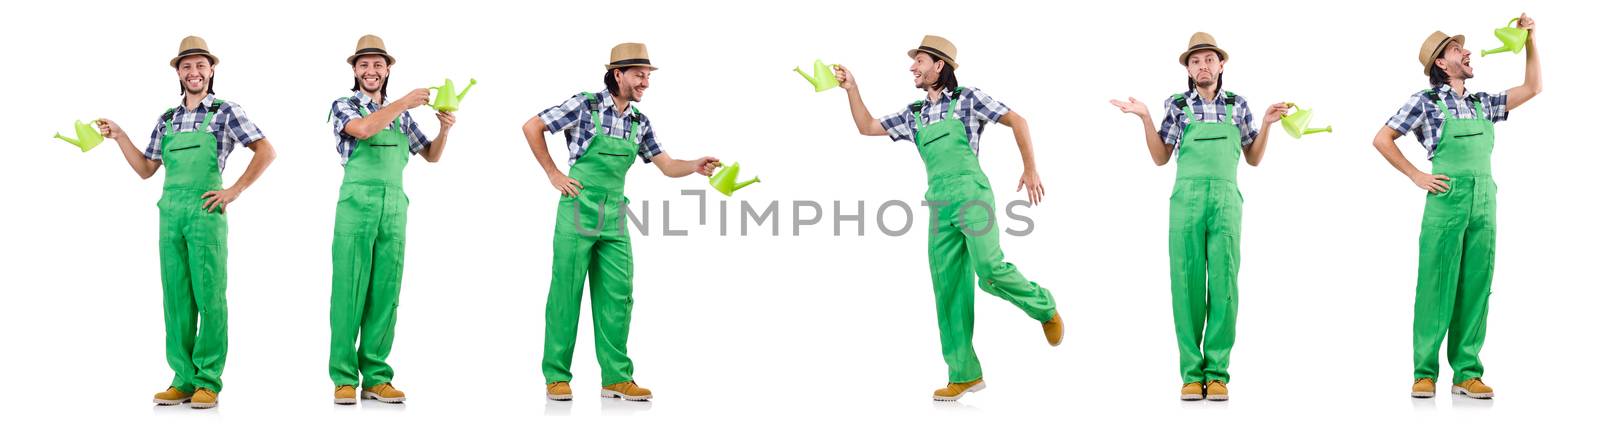 Young cheerful gardener with watering can isolated on white